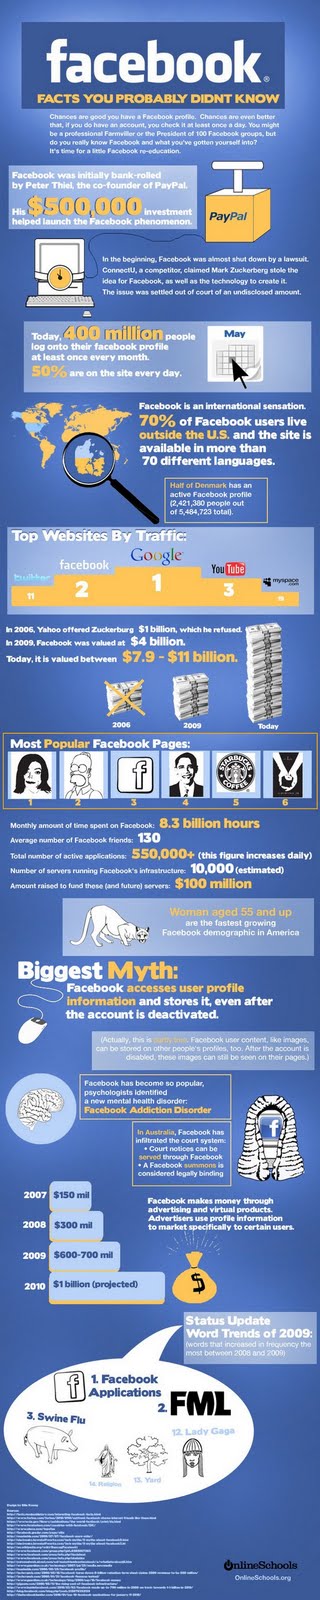 Facts About Facebook You Probably Didnt Know